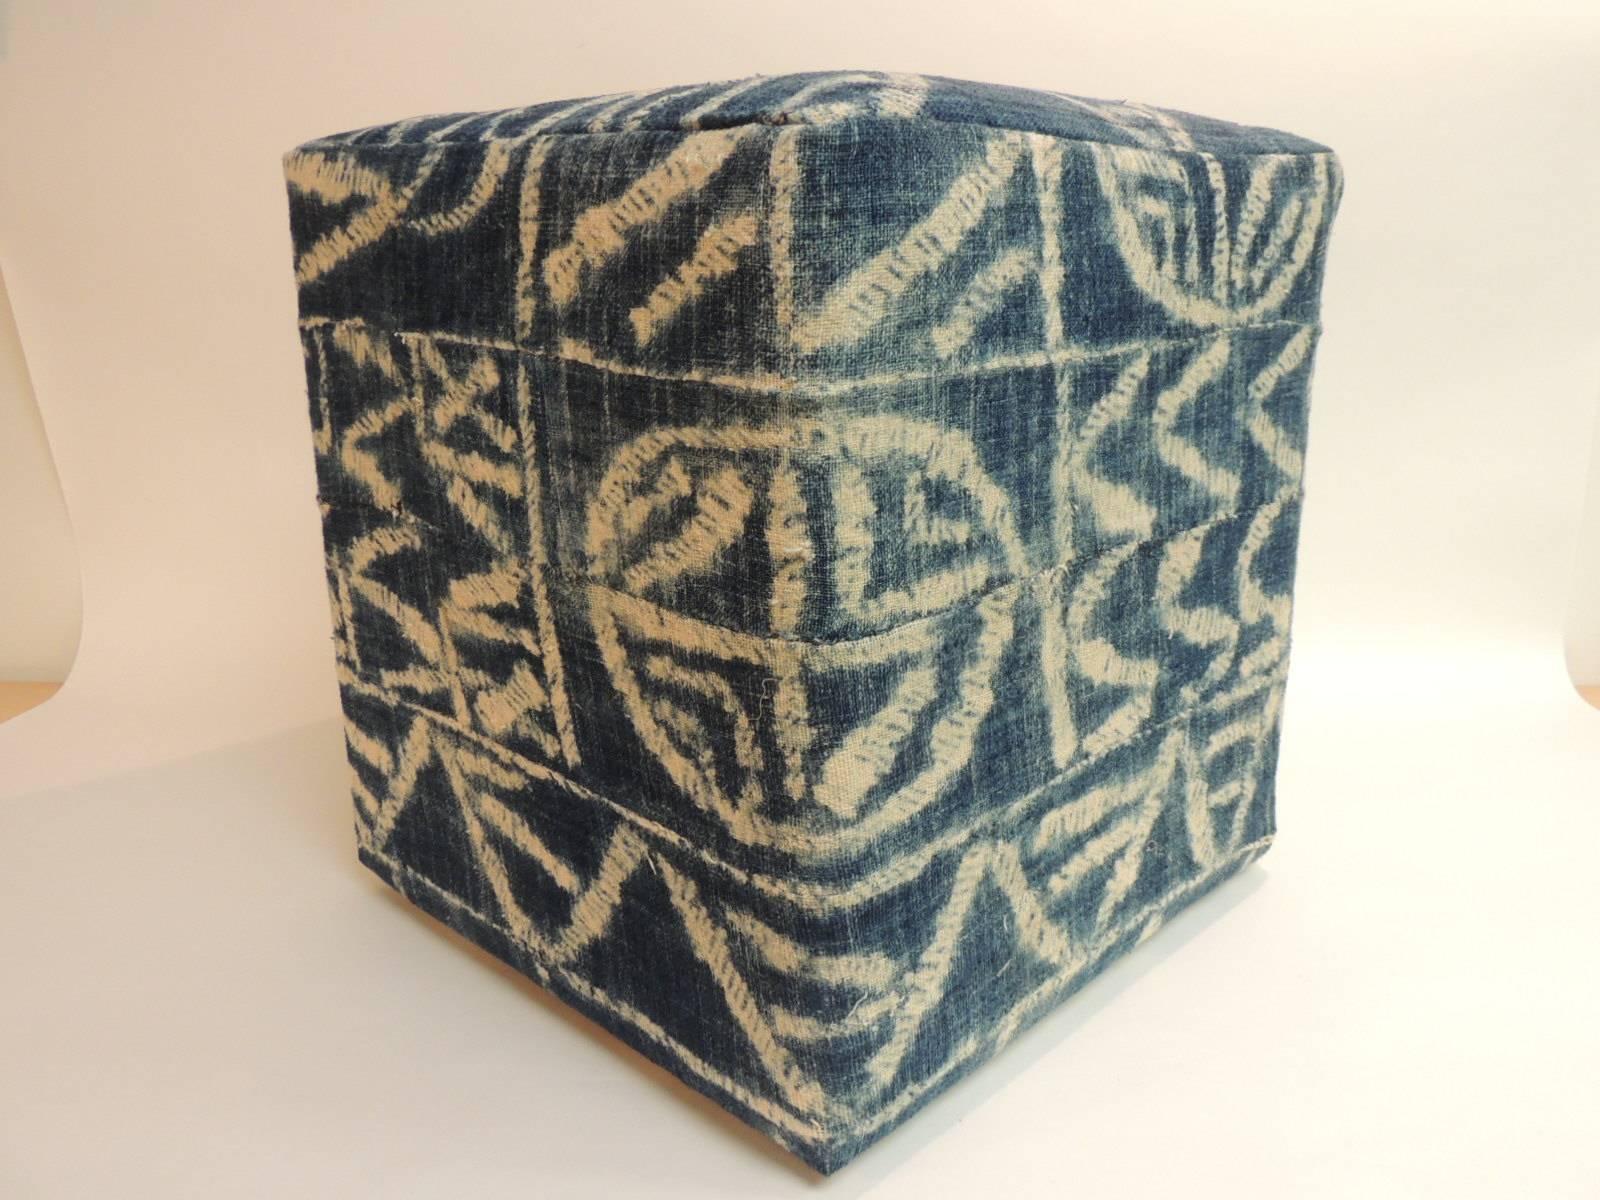 Hand-Crafted African Blue and Natural Vintage Ndop Textile Upholstered Square Ottoman